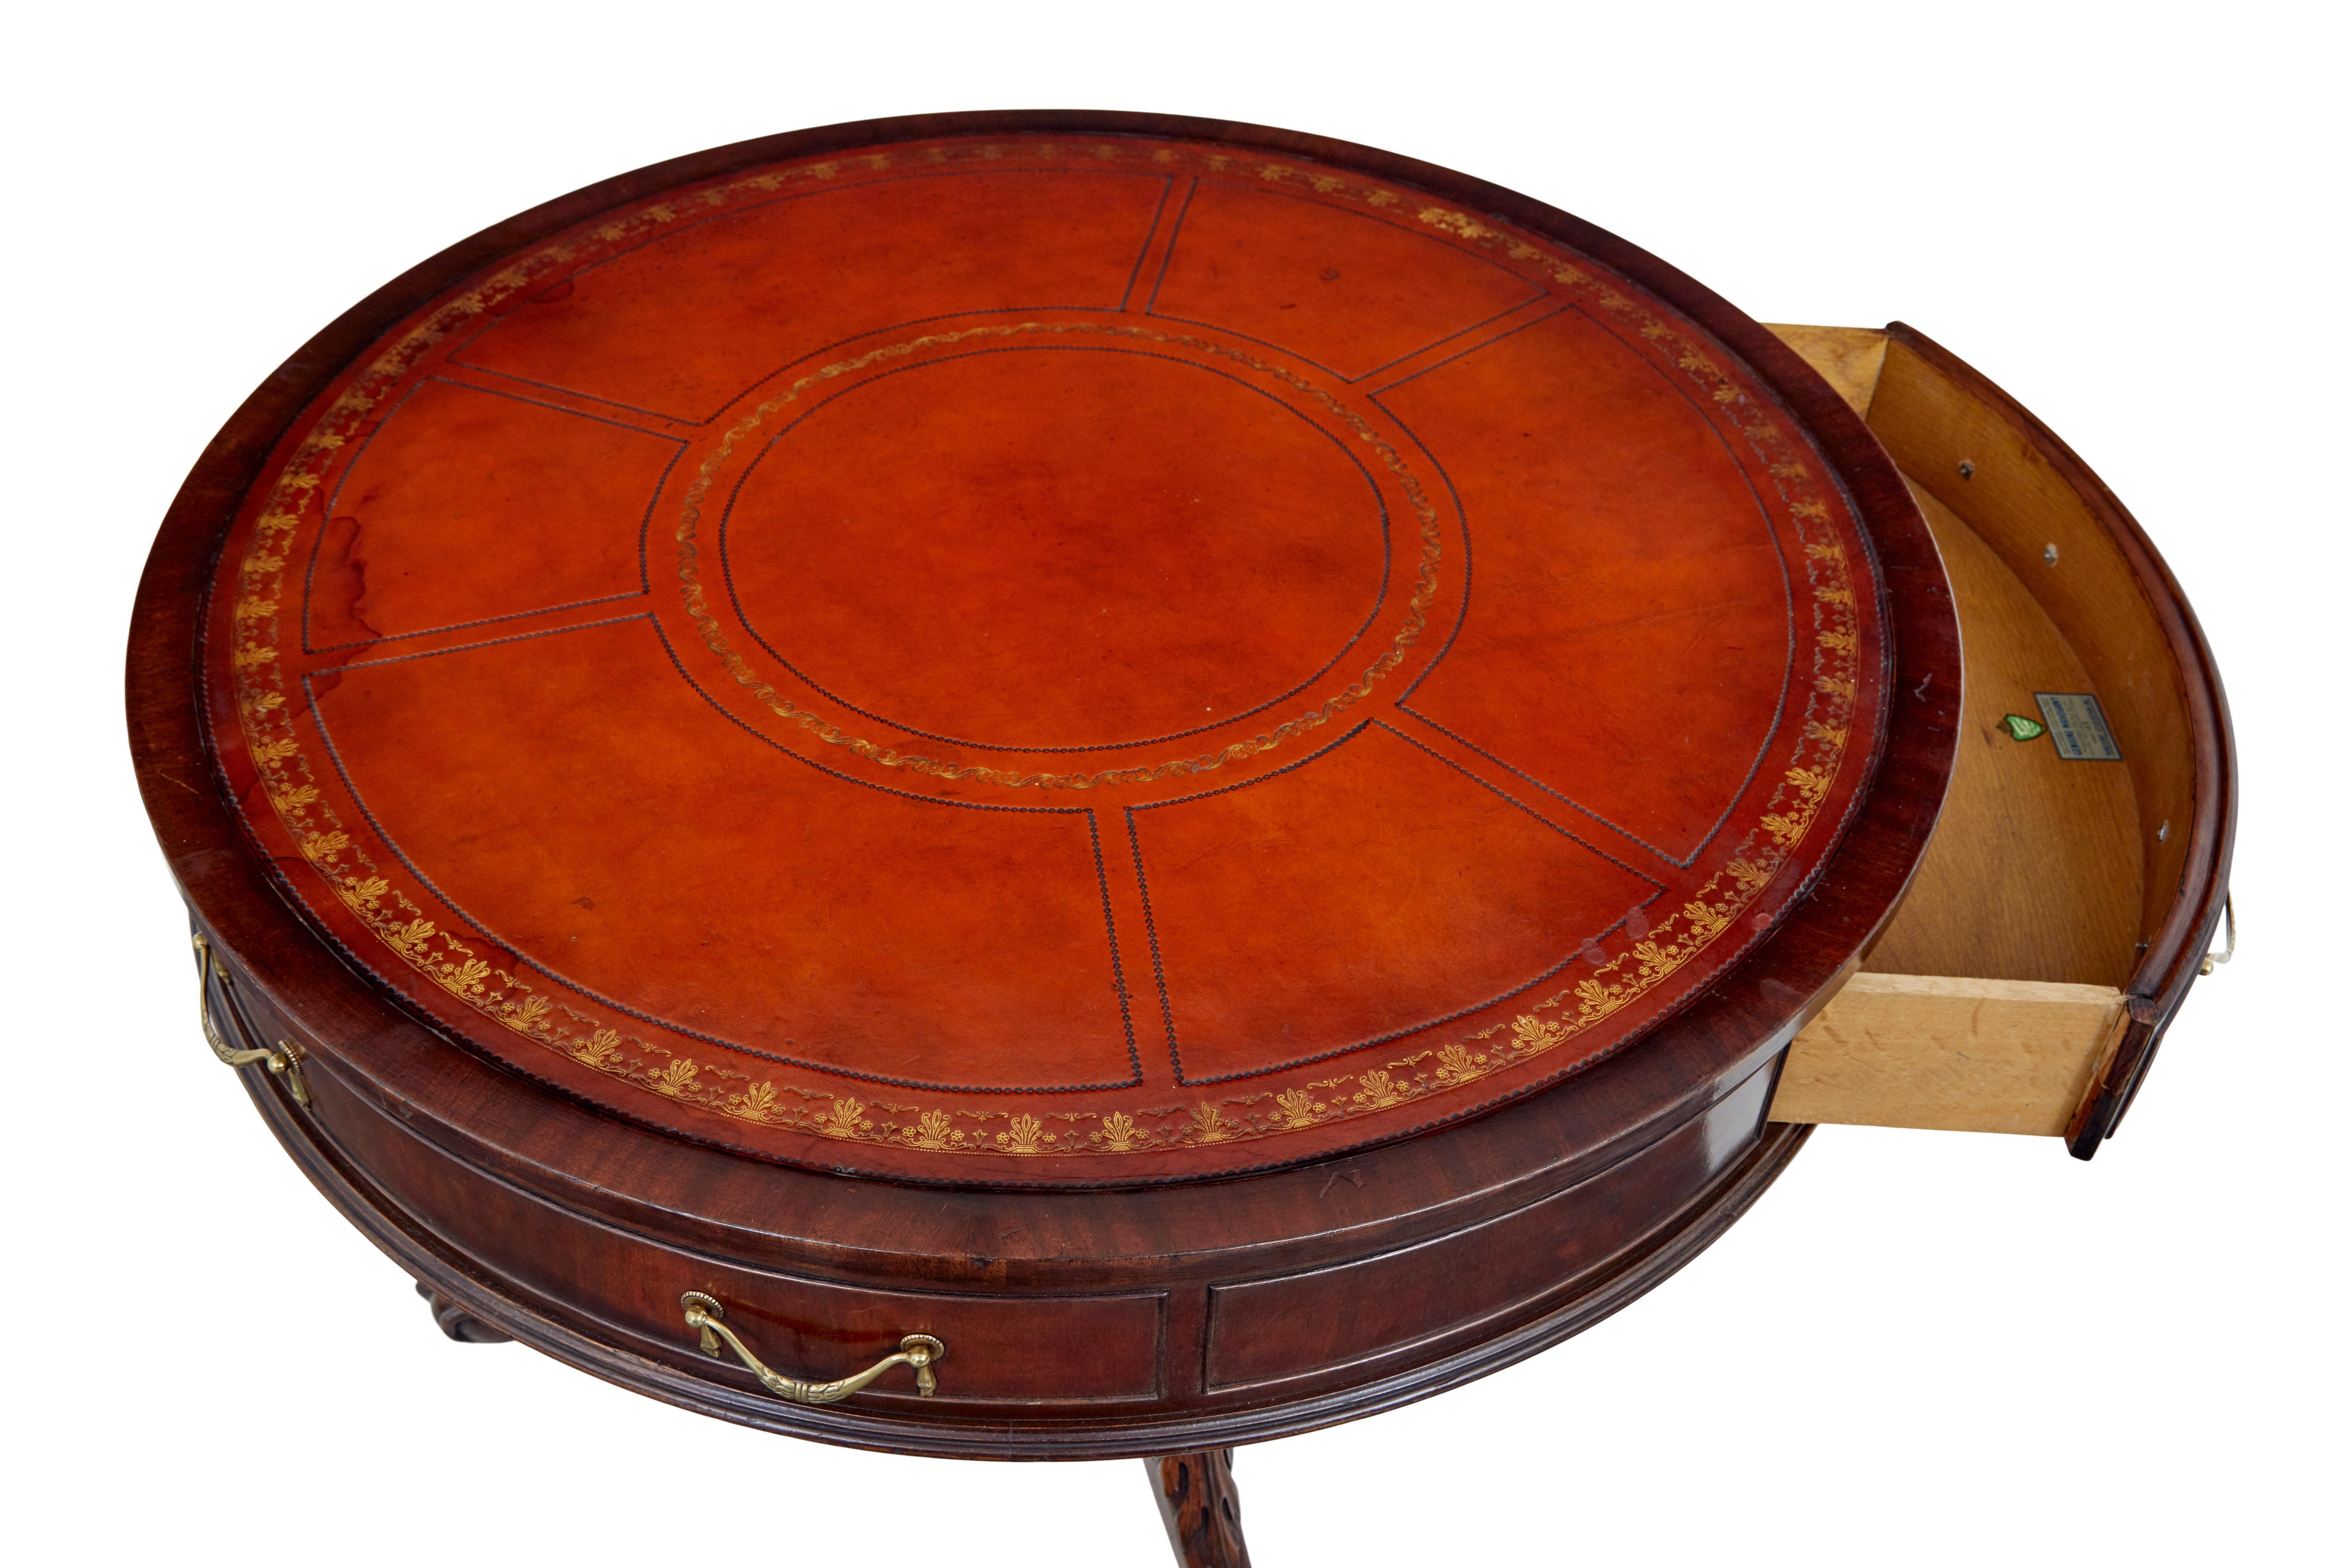 Chippendale Mid 20th century American imperial mahogany drum table For Sale